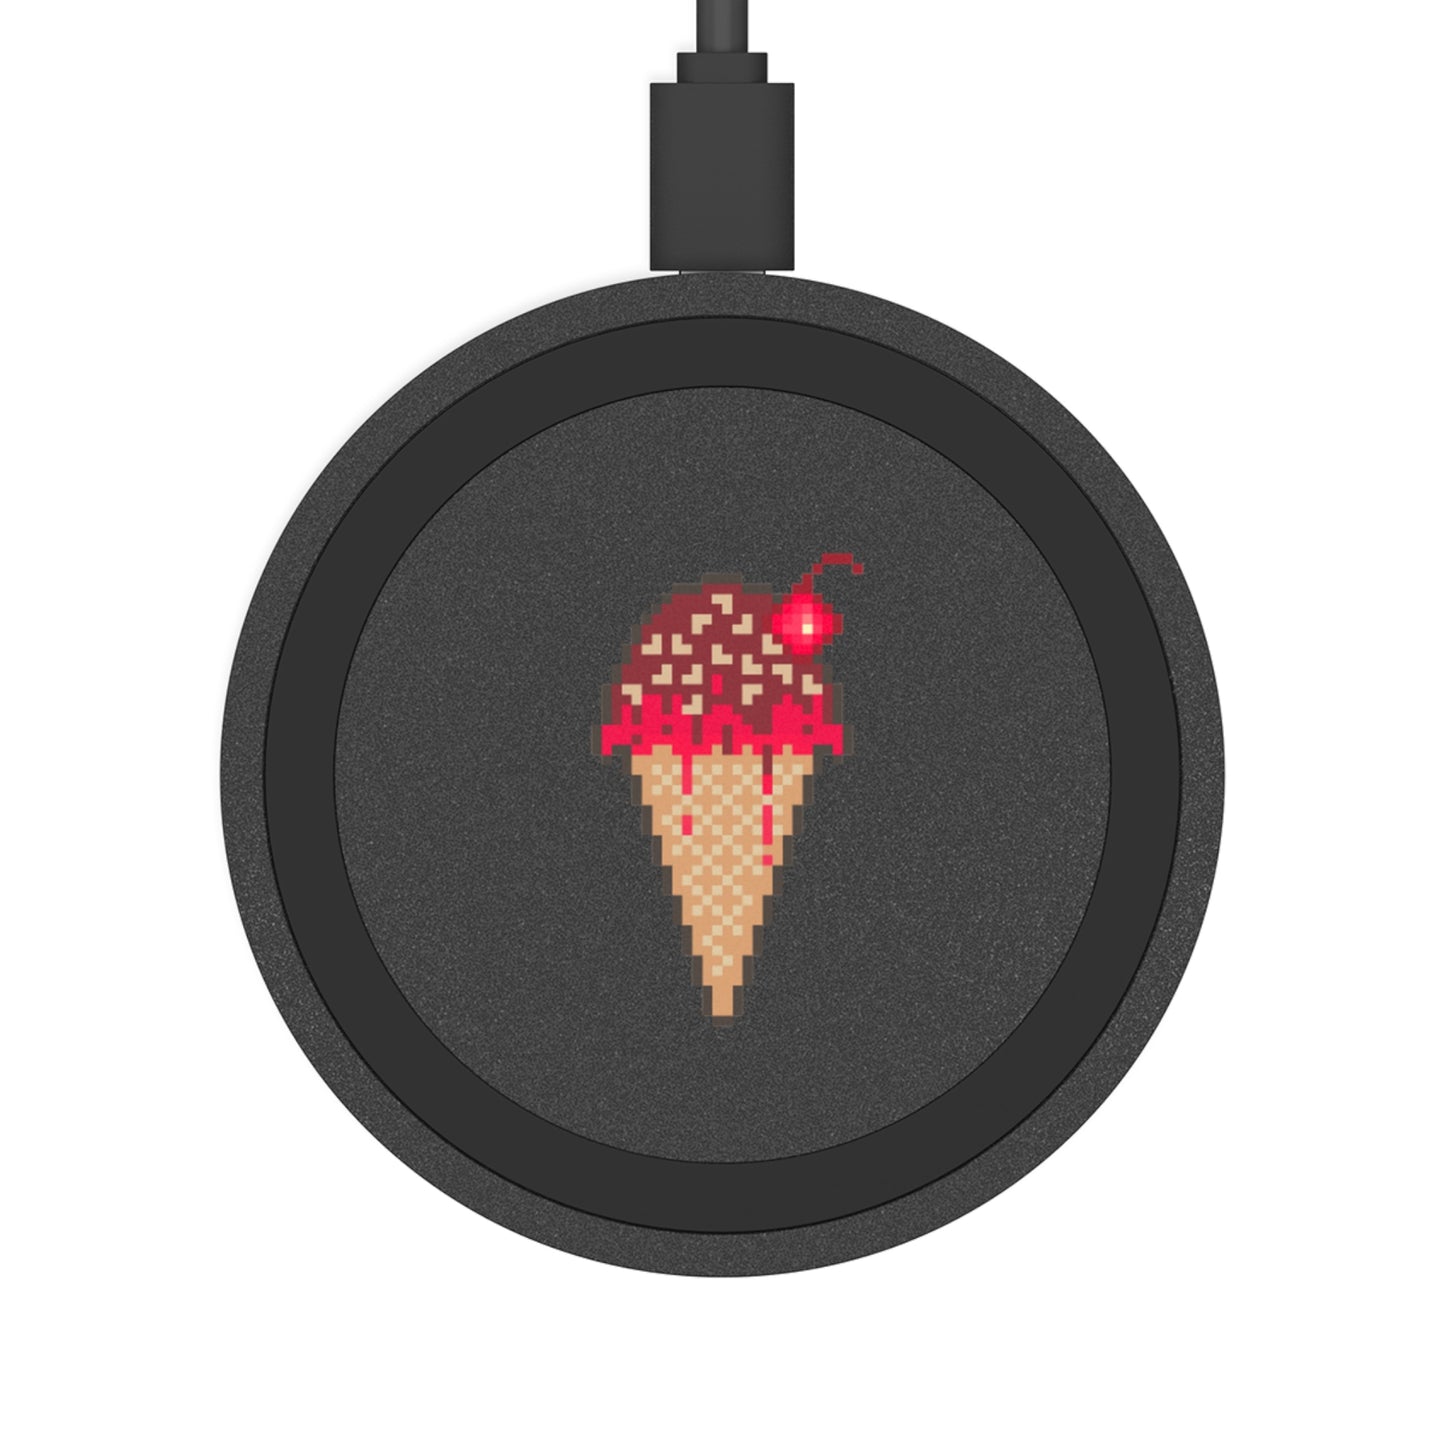 Wireless Charging Pad Ft. Pixel Cone (cable included)